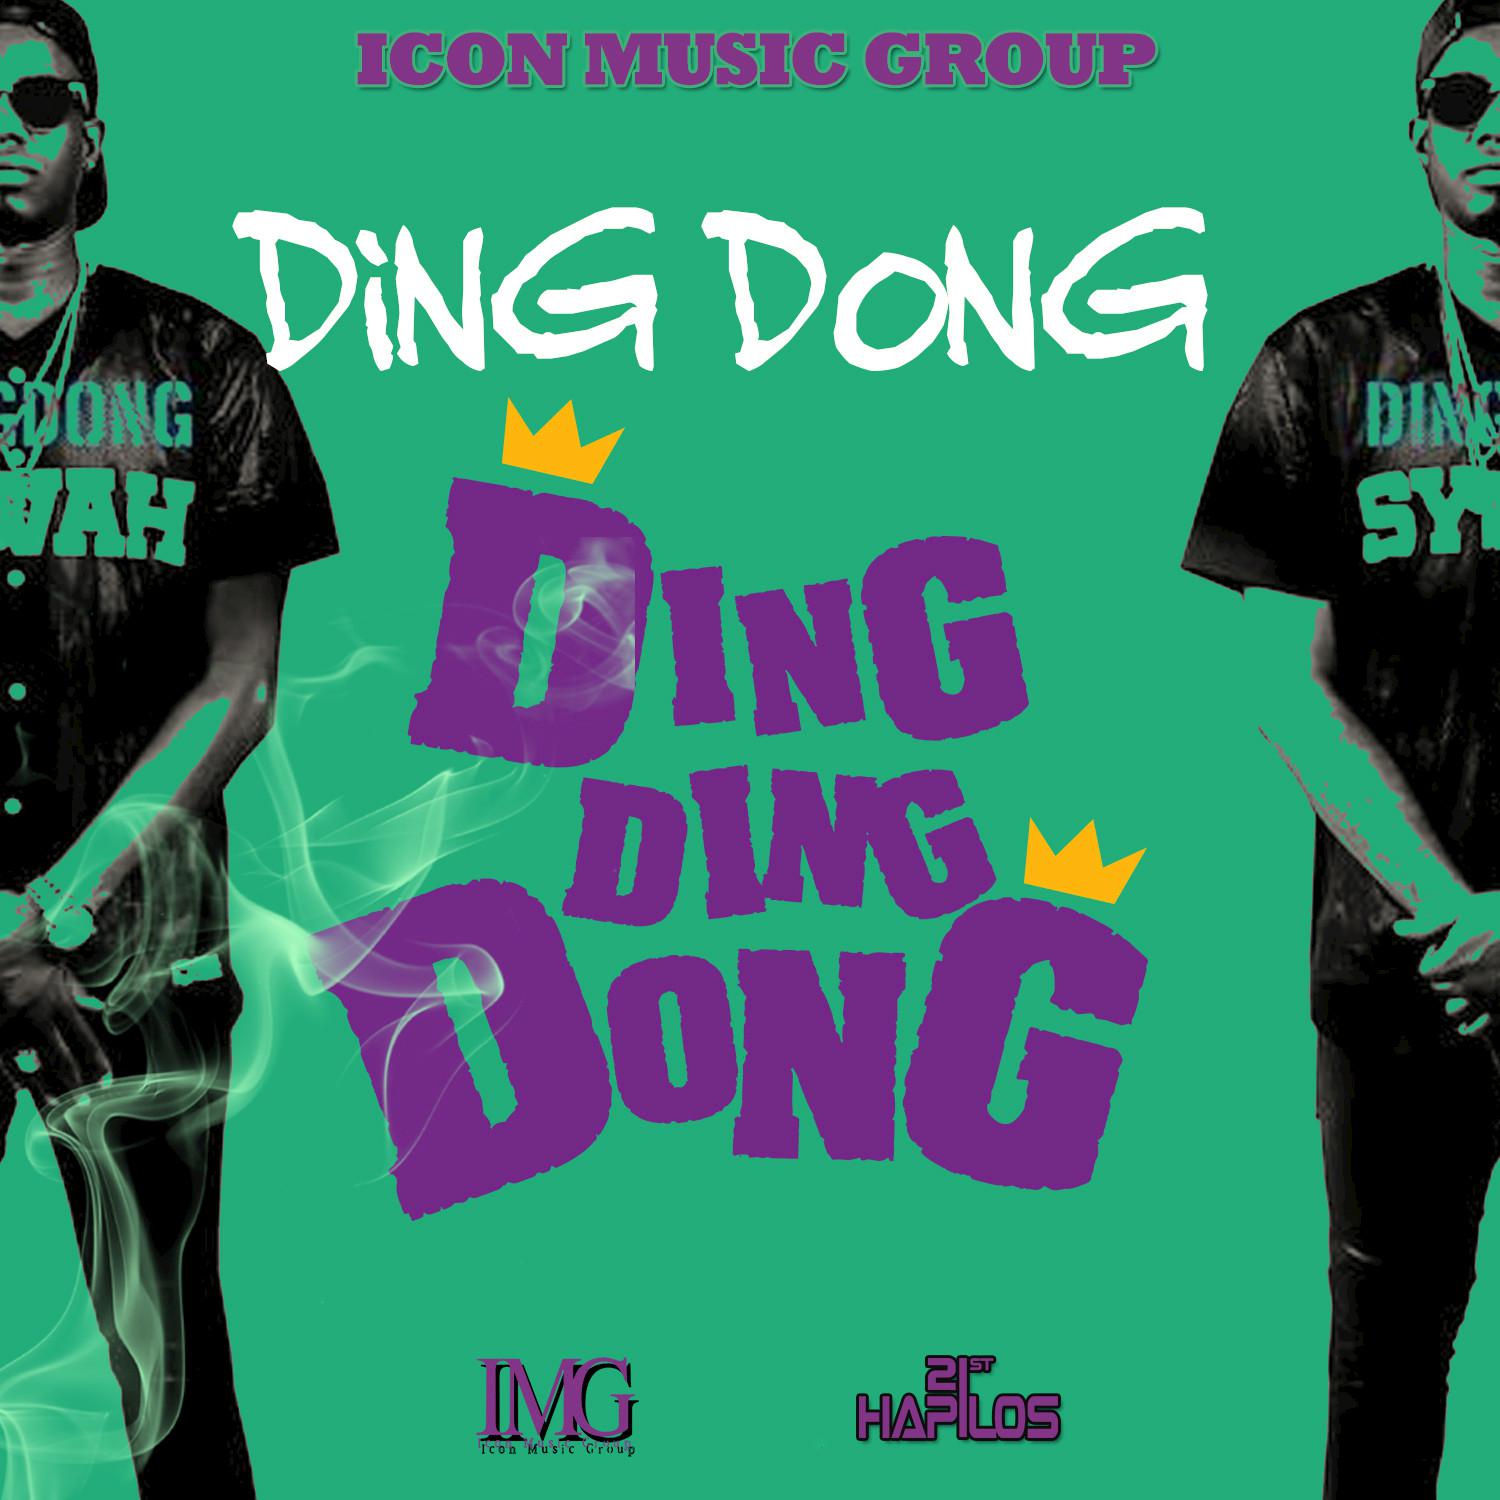 Ding Ding Dong - Single